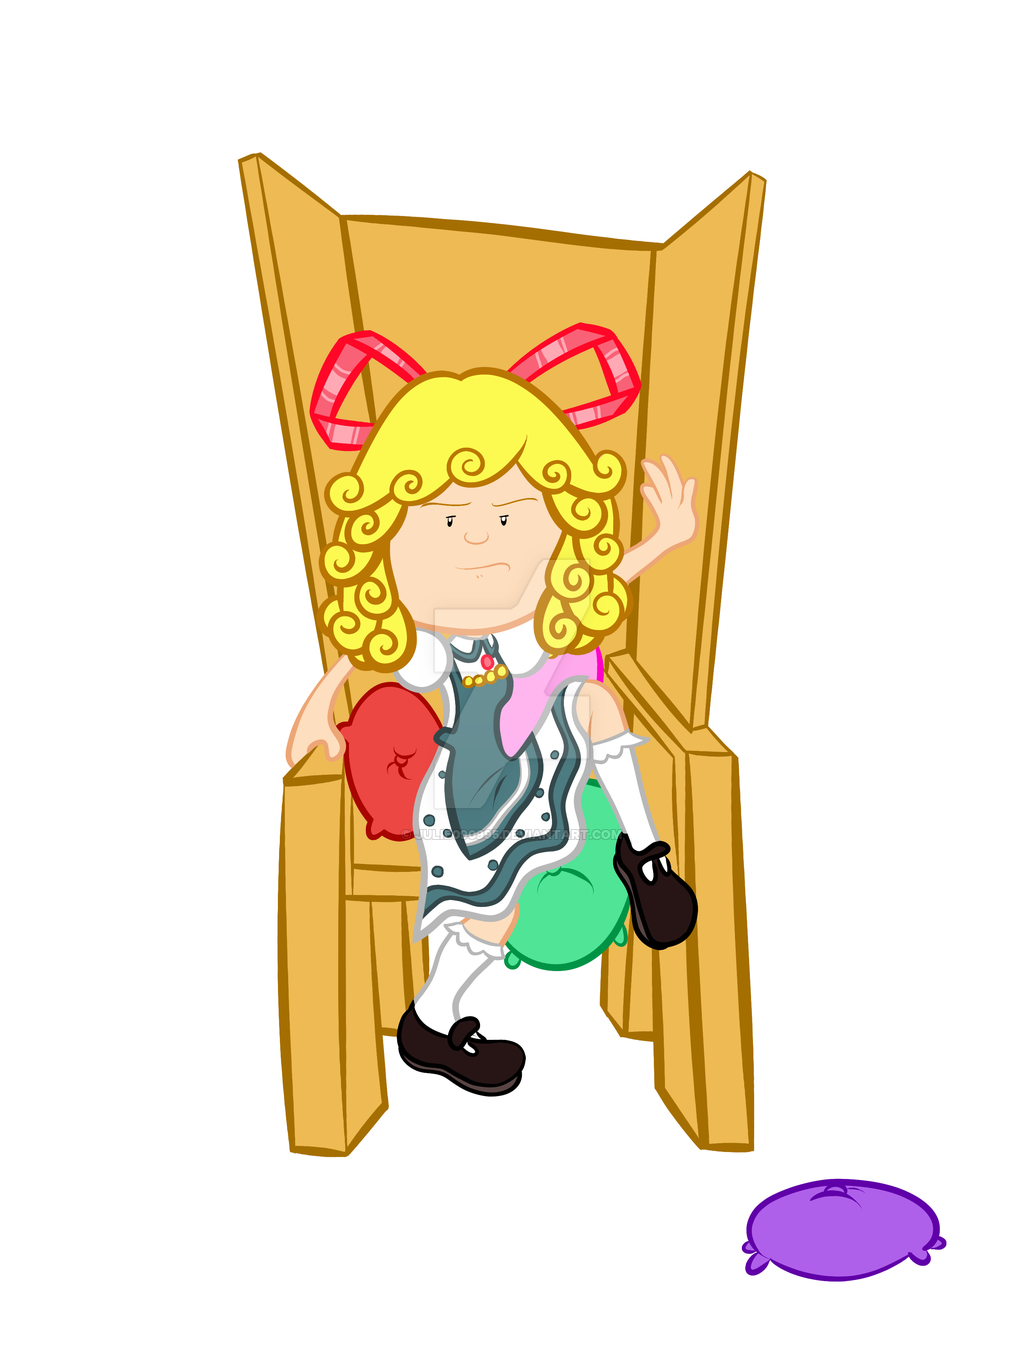 Goldilocks and Her Chair by j